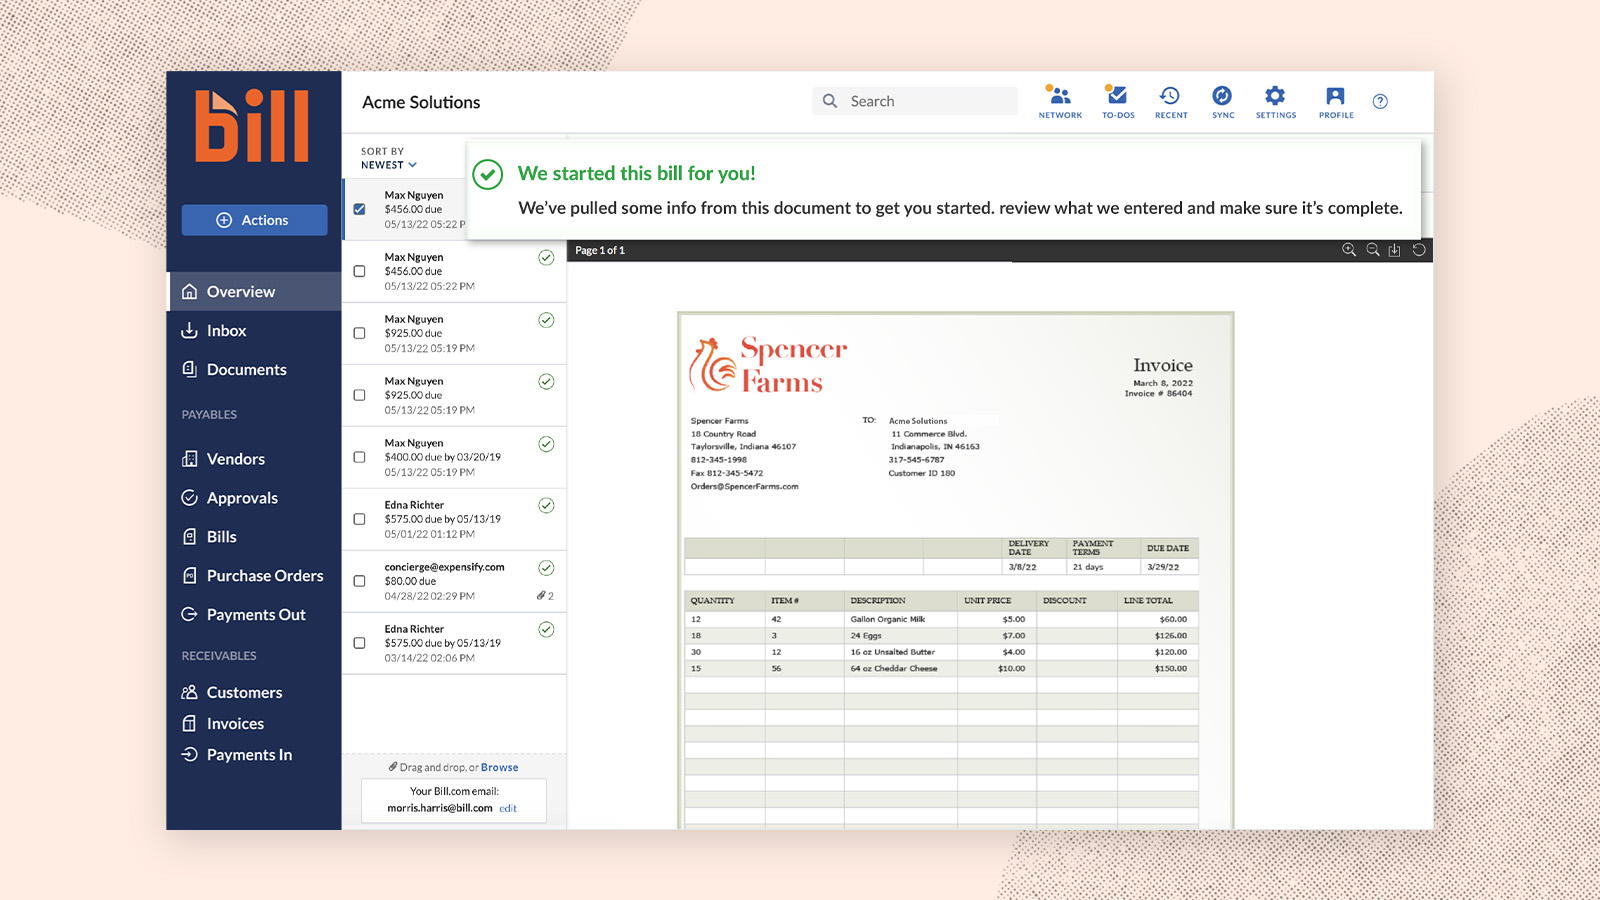 BILL automatically pulls in bills via your email and gets the process started for you. It also checks for duplicate invoices by looking at the invoice numbers and payment amounts to flag questionable invoices.